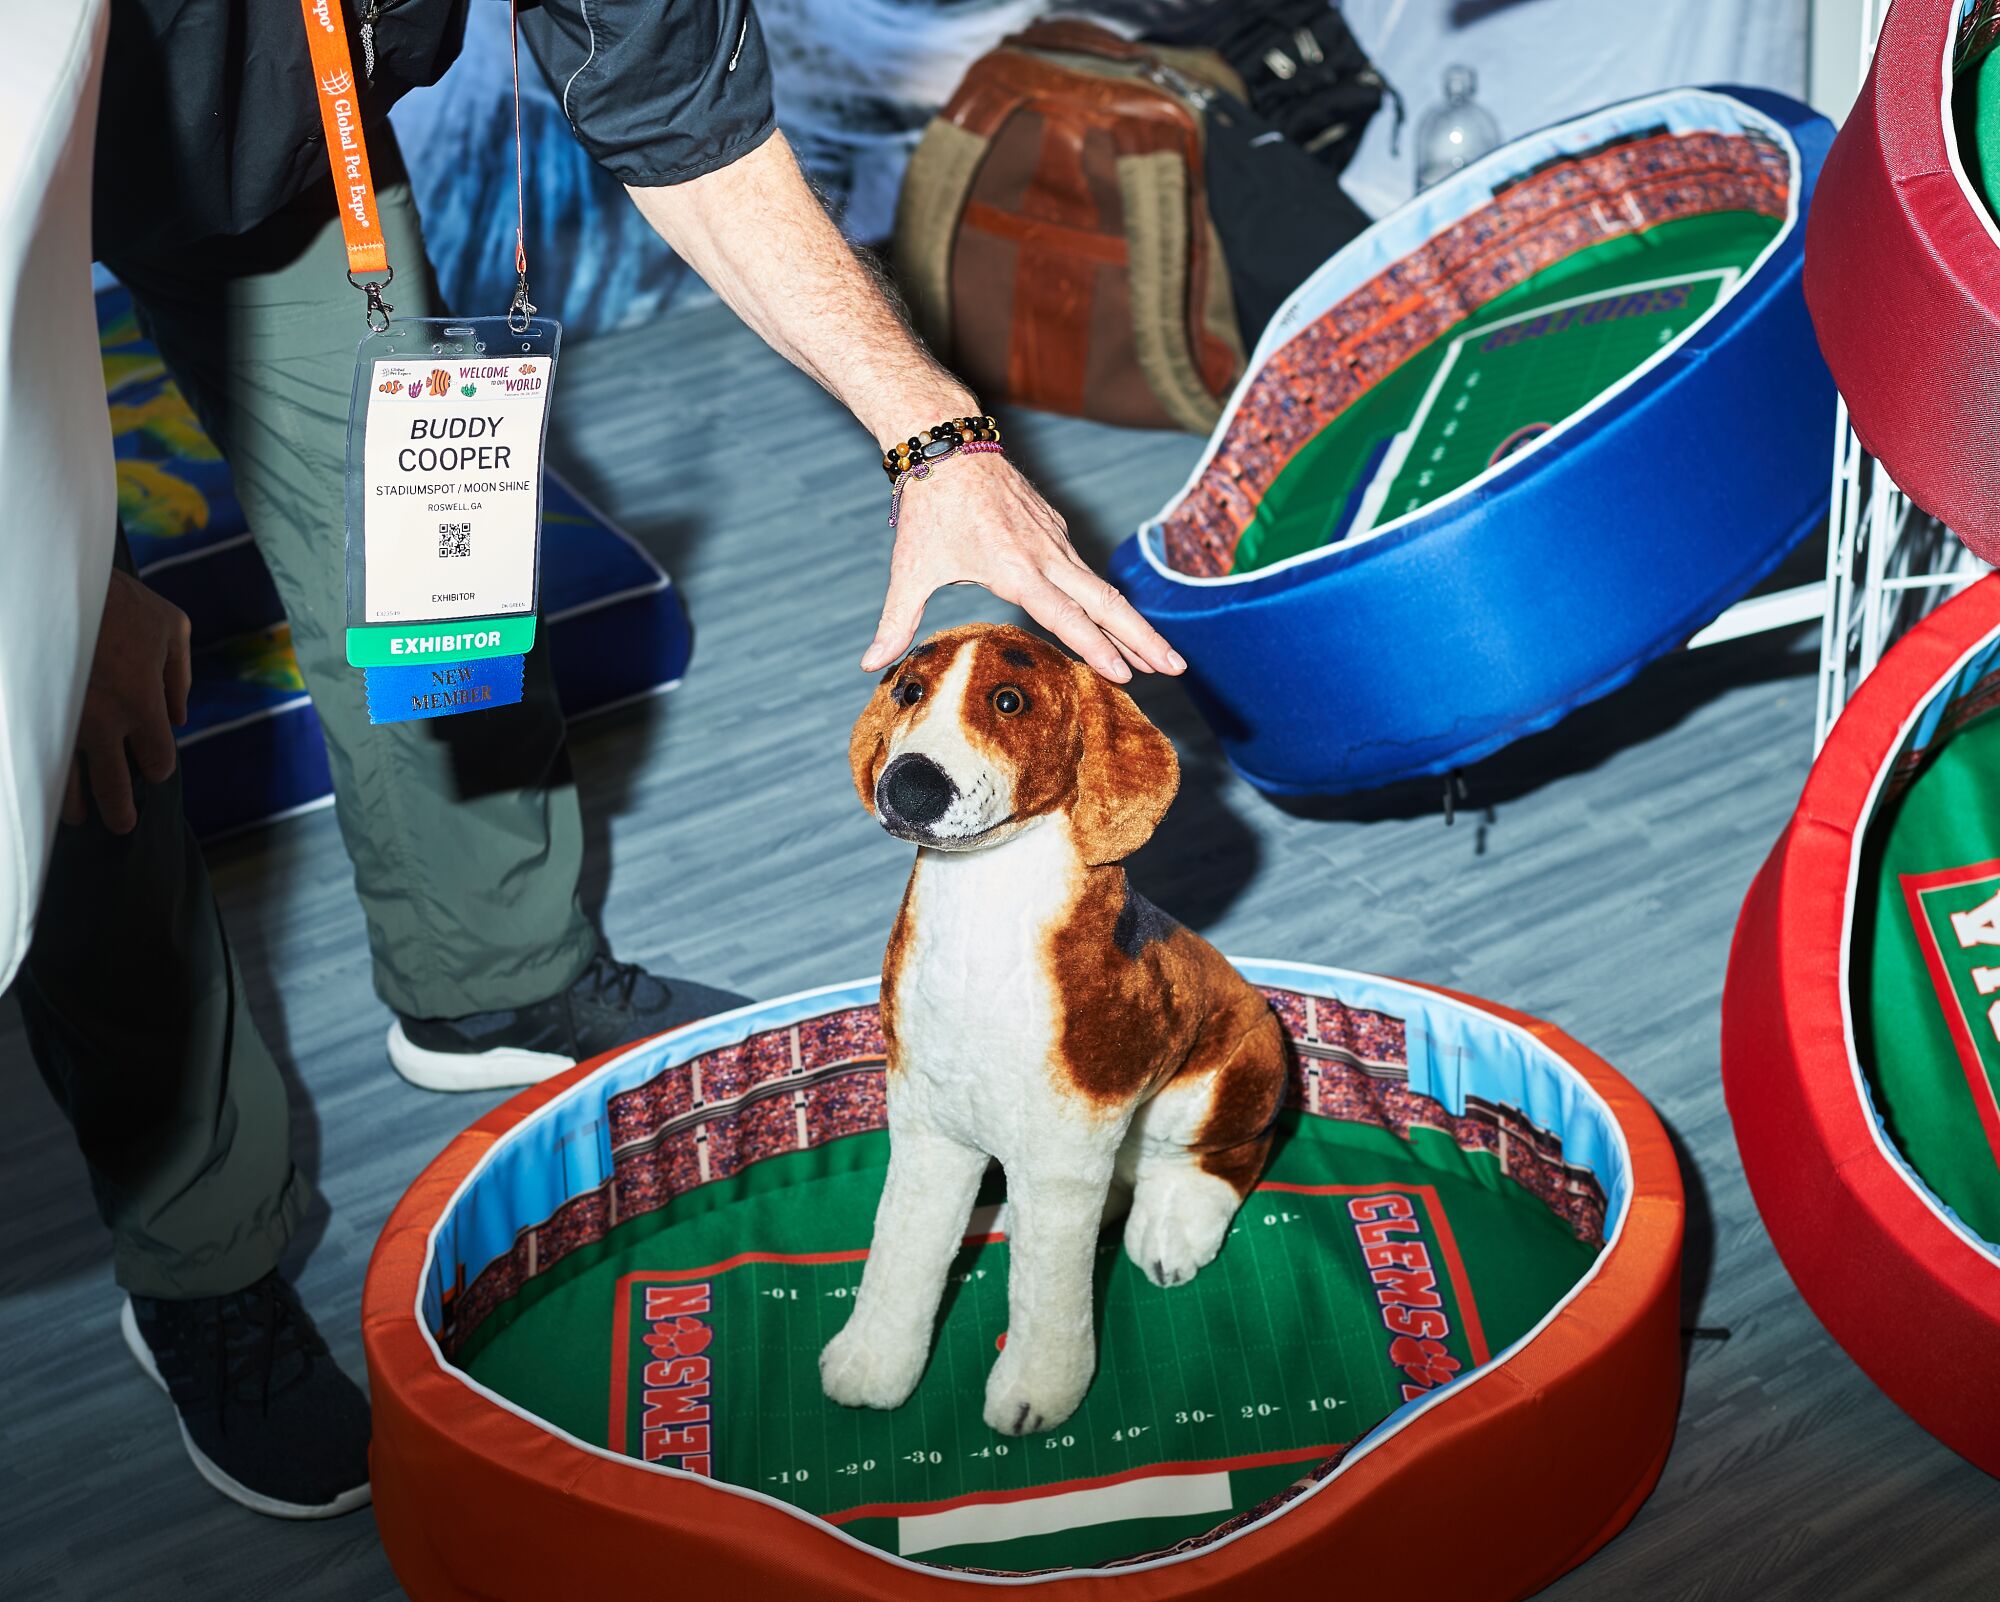 A stuffed animal is used to show off a football-themed pet bed.